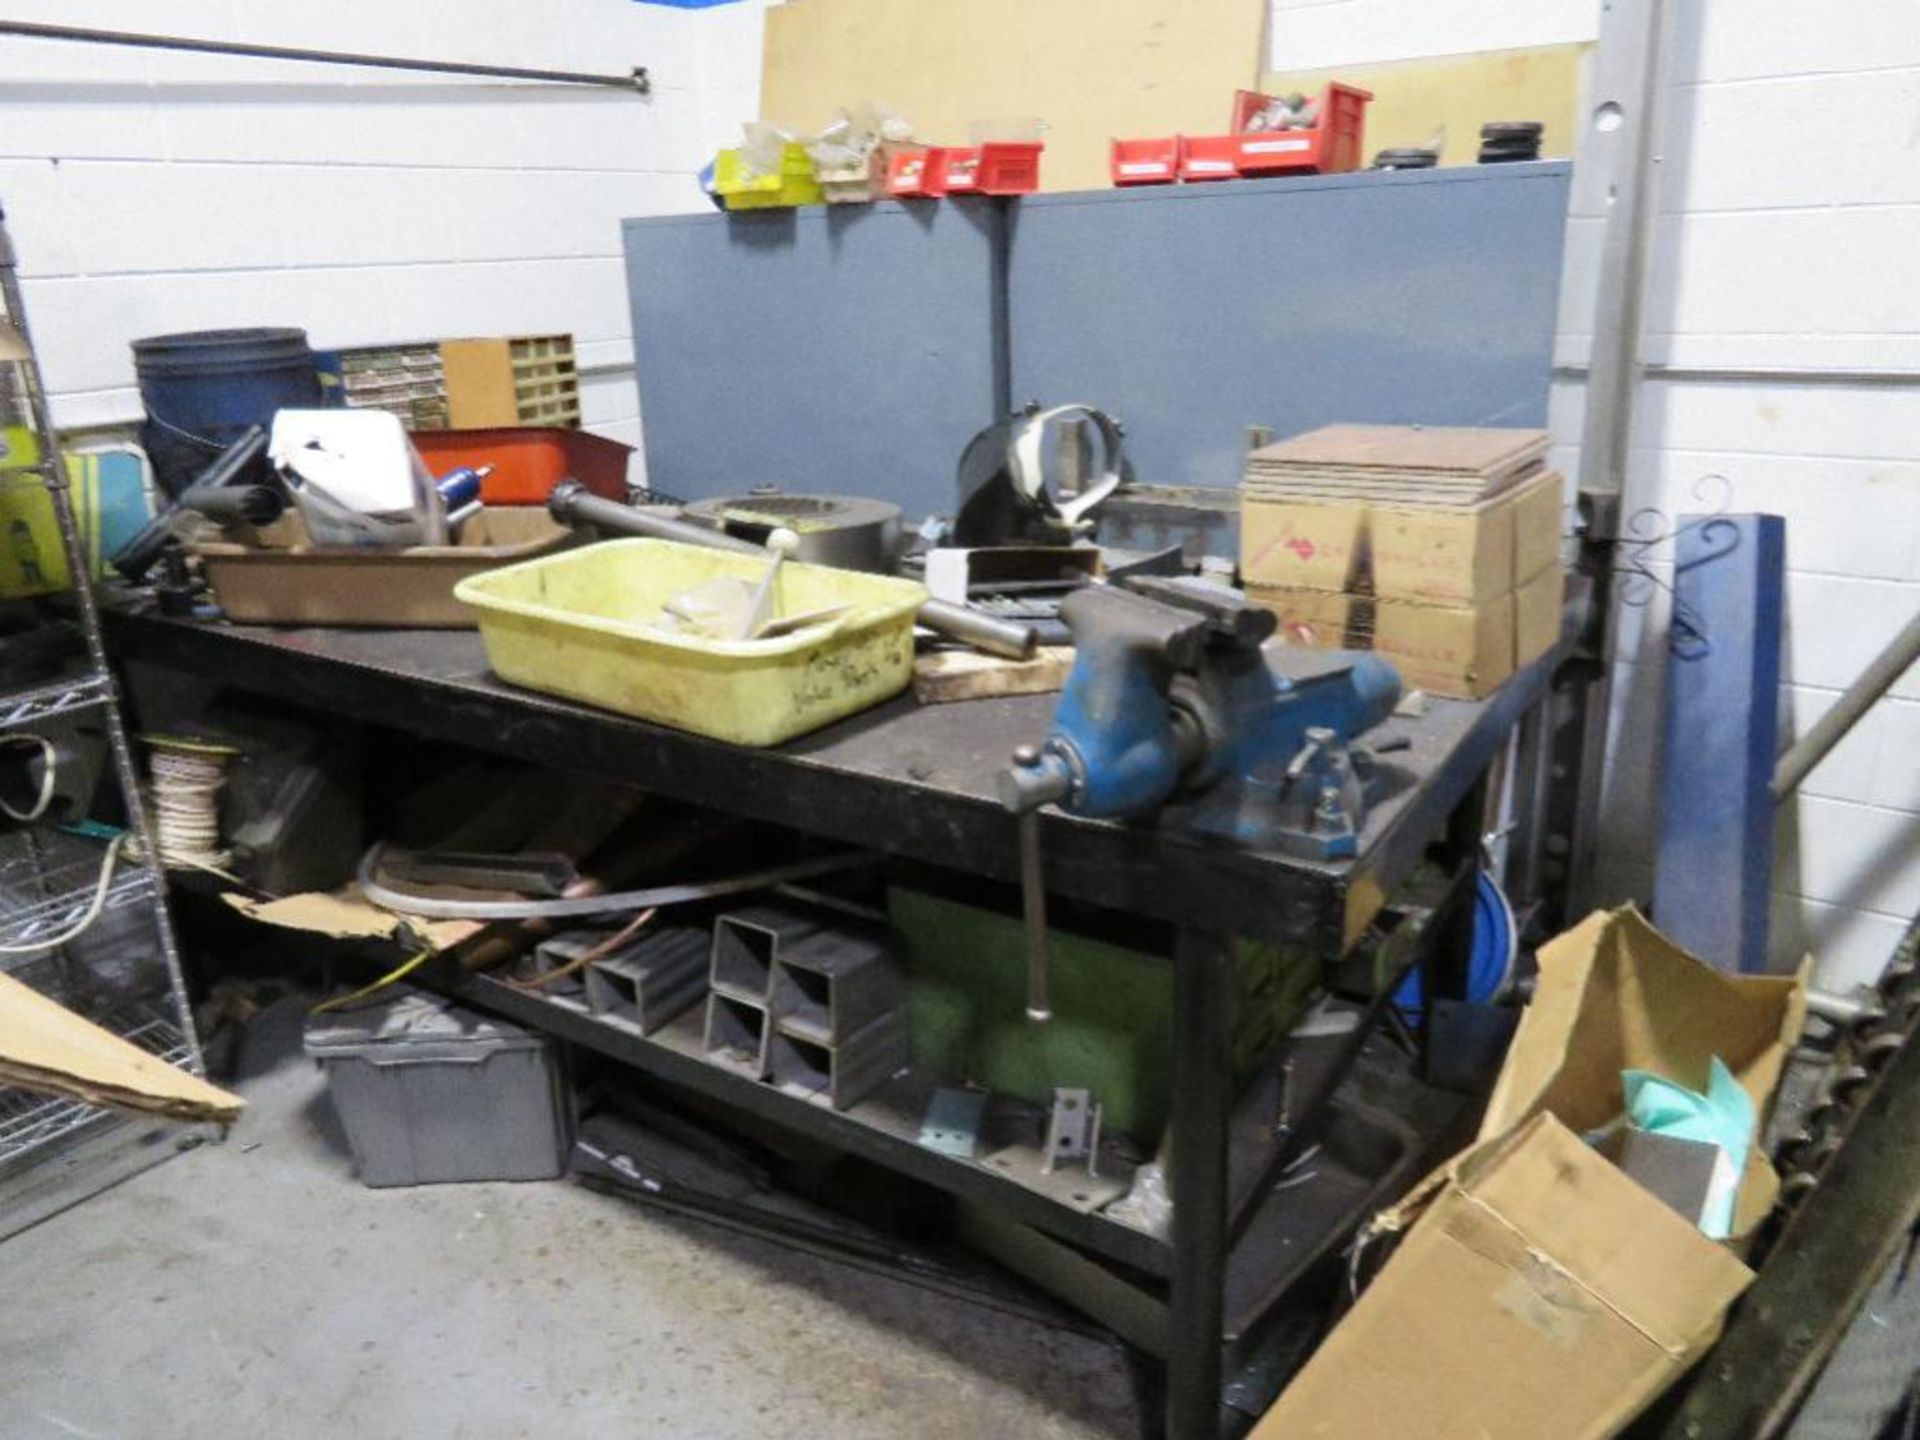 LOT: 48 in. x 96 in. Steel Table with Vise & Shelving Units with Contents of Conveyor Parts, Bearing - Image 3 of 3